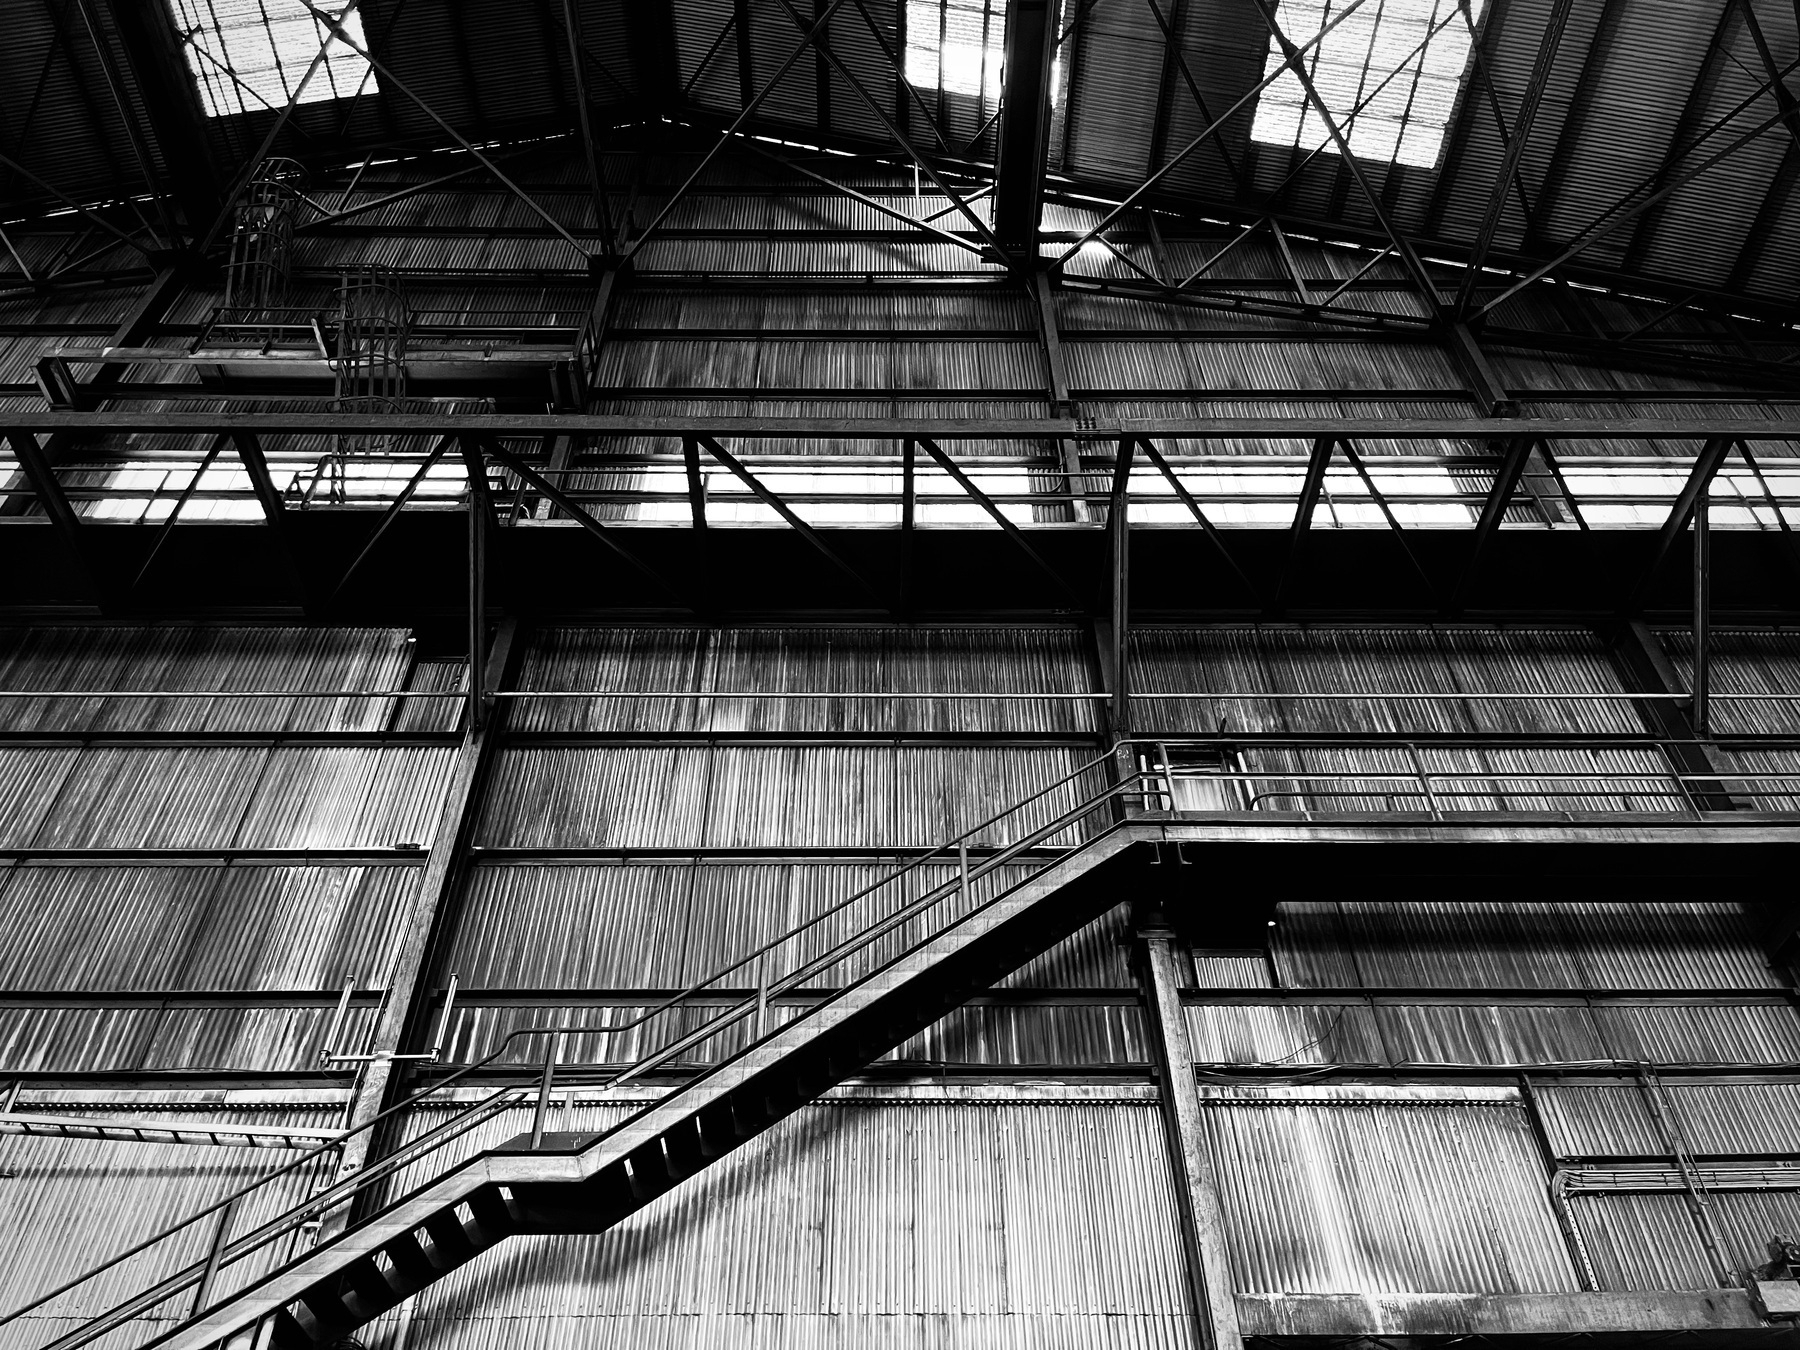 A black-and-white image of a staircase in a warehouse